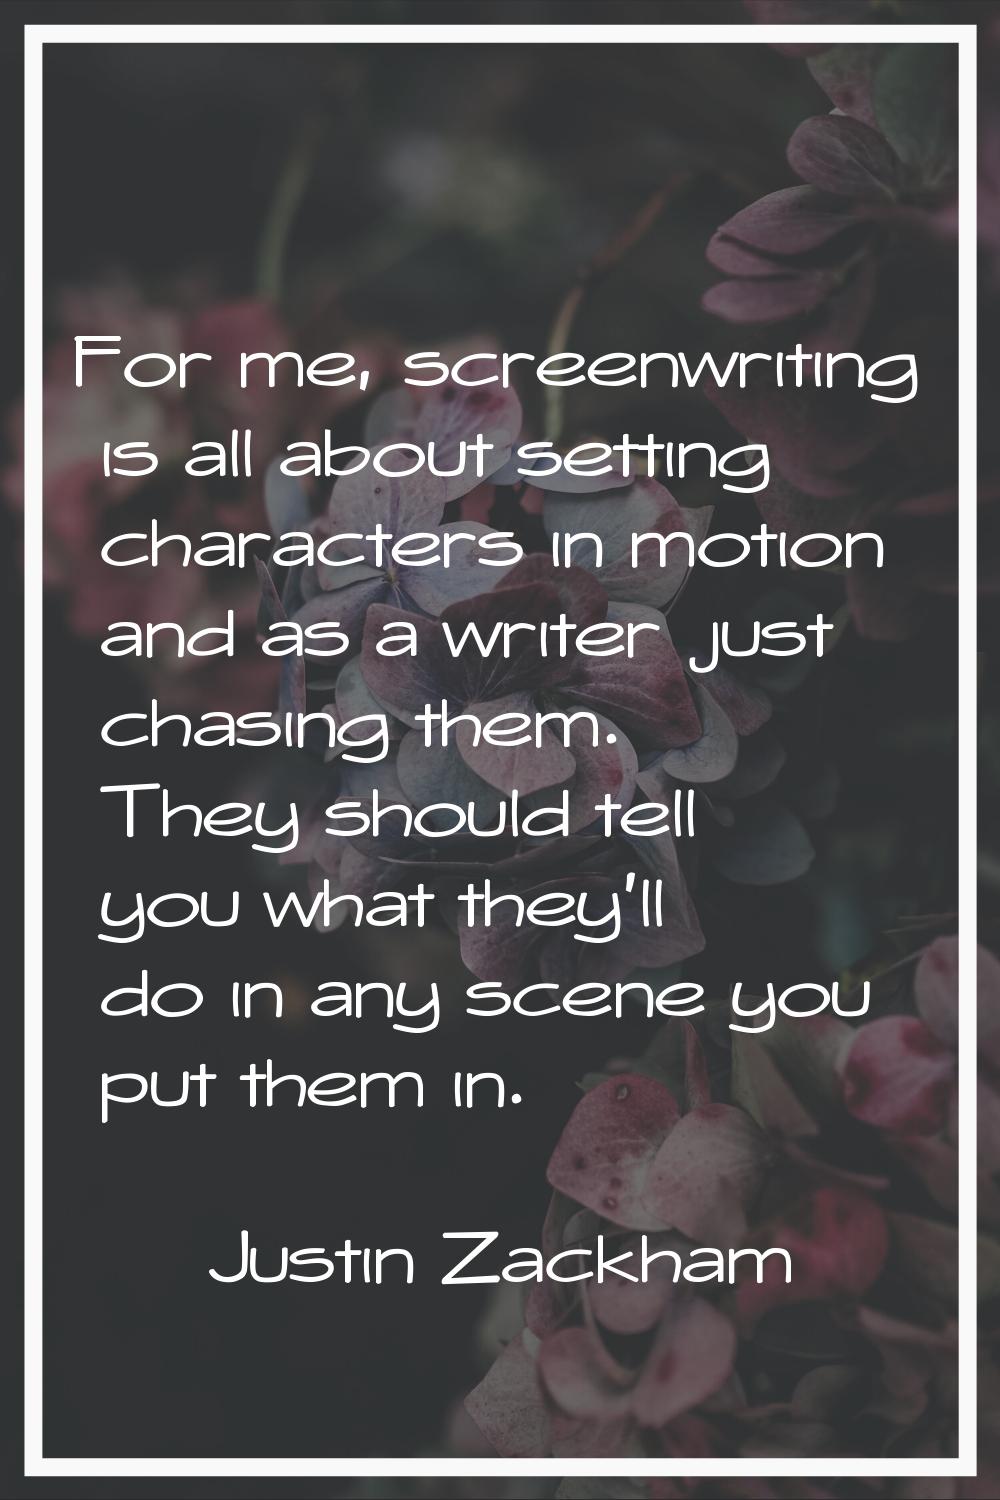 For me, screenwriting is all about setting characters in motion and as a writer just chasing them. 